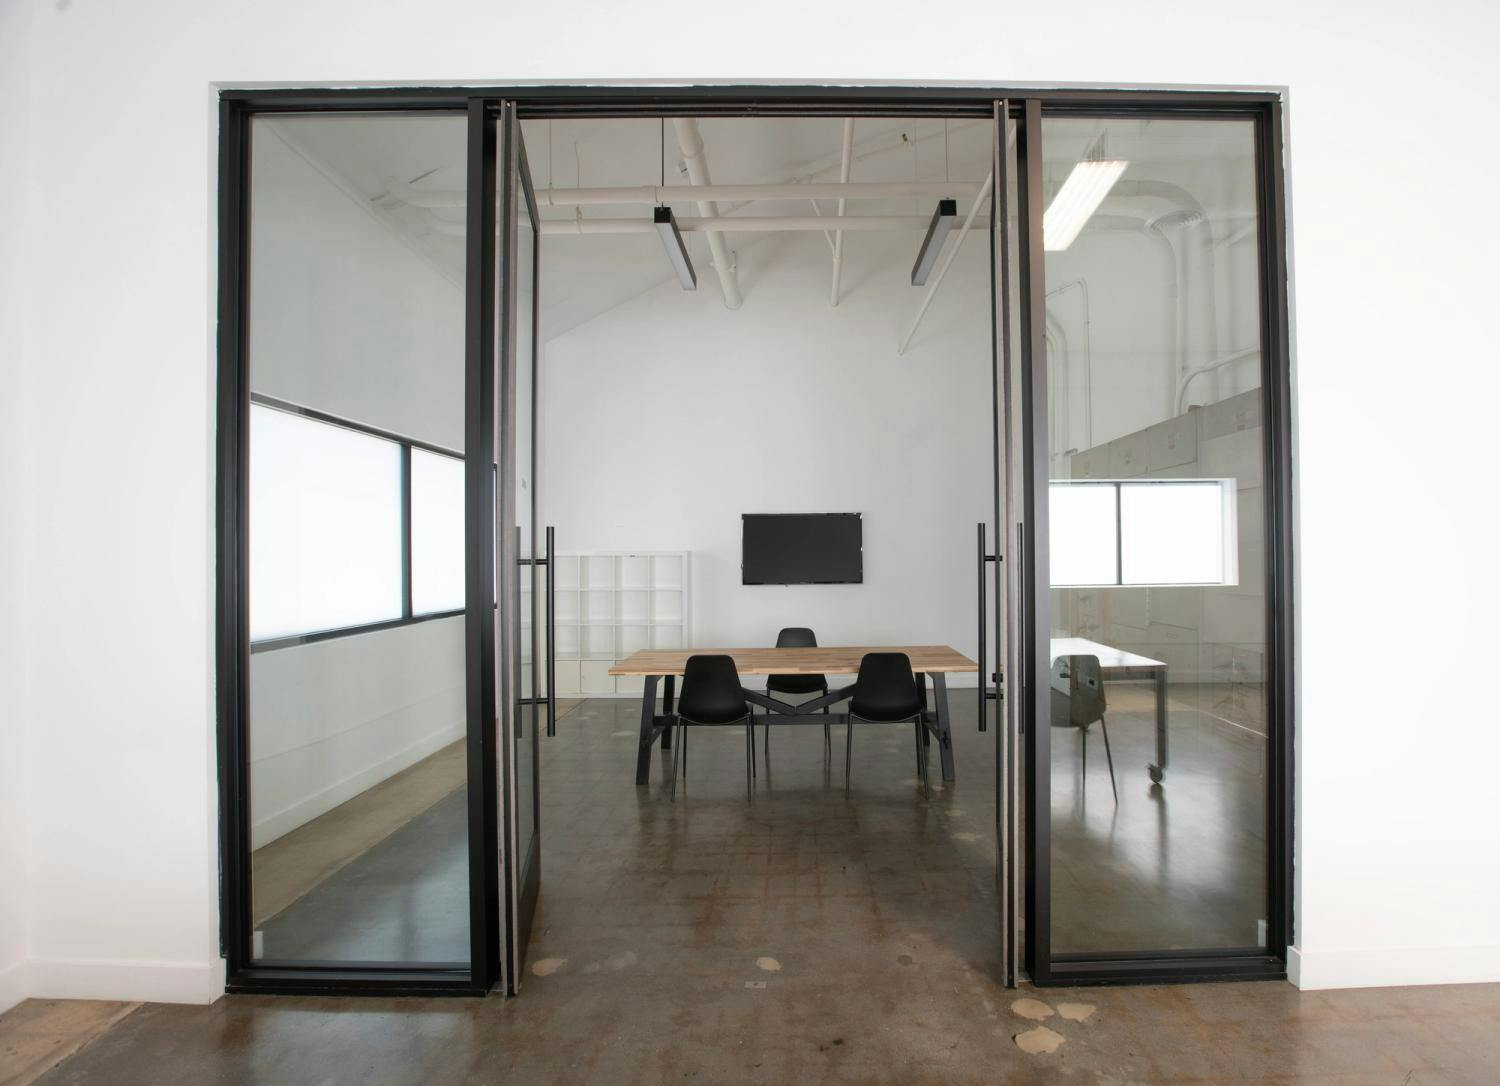 Through open glass doors, a modern office with a wooden table, black chairs, and a TV is framed by an industrial-style interior.